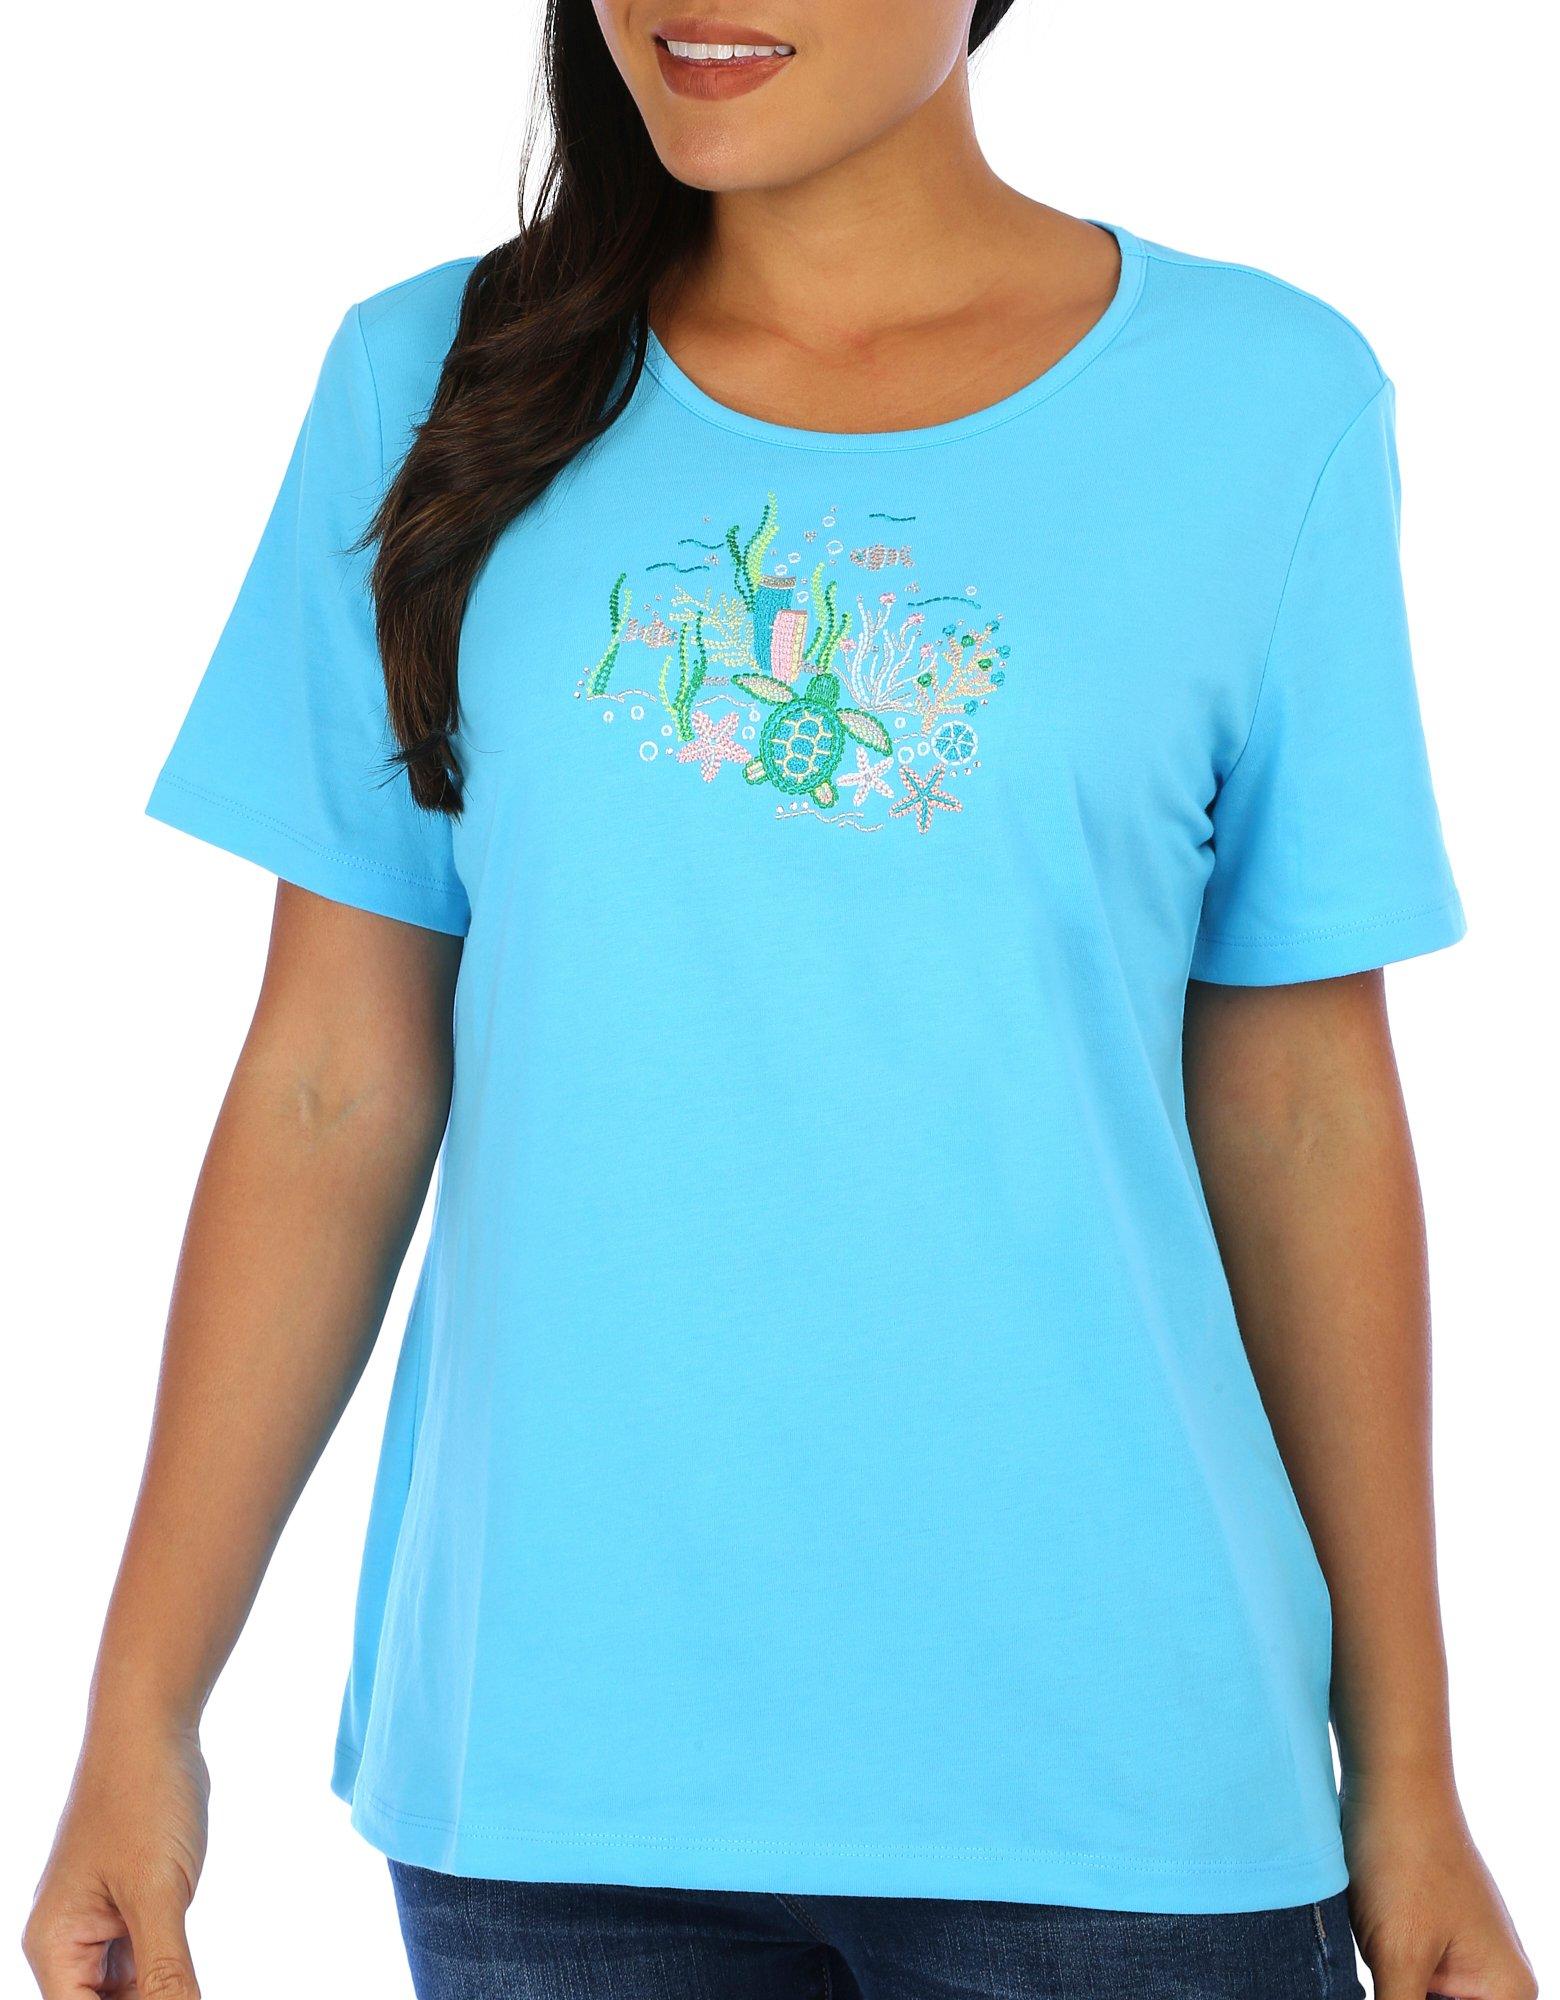 Coral Bay Womens Embroidered Sea Life Short Sleeve Crew Top